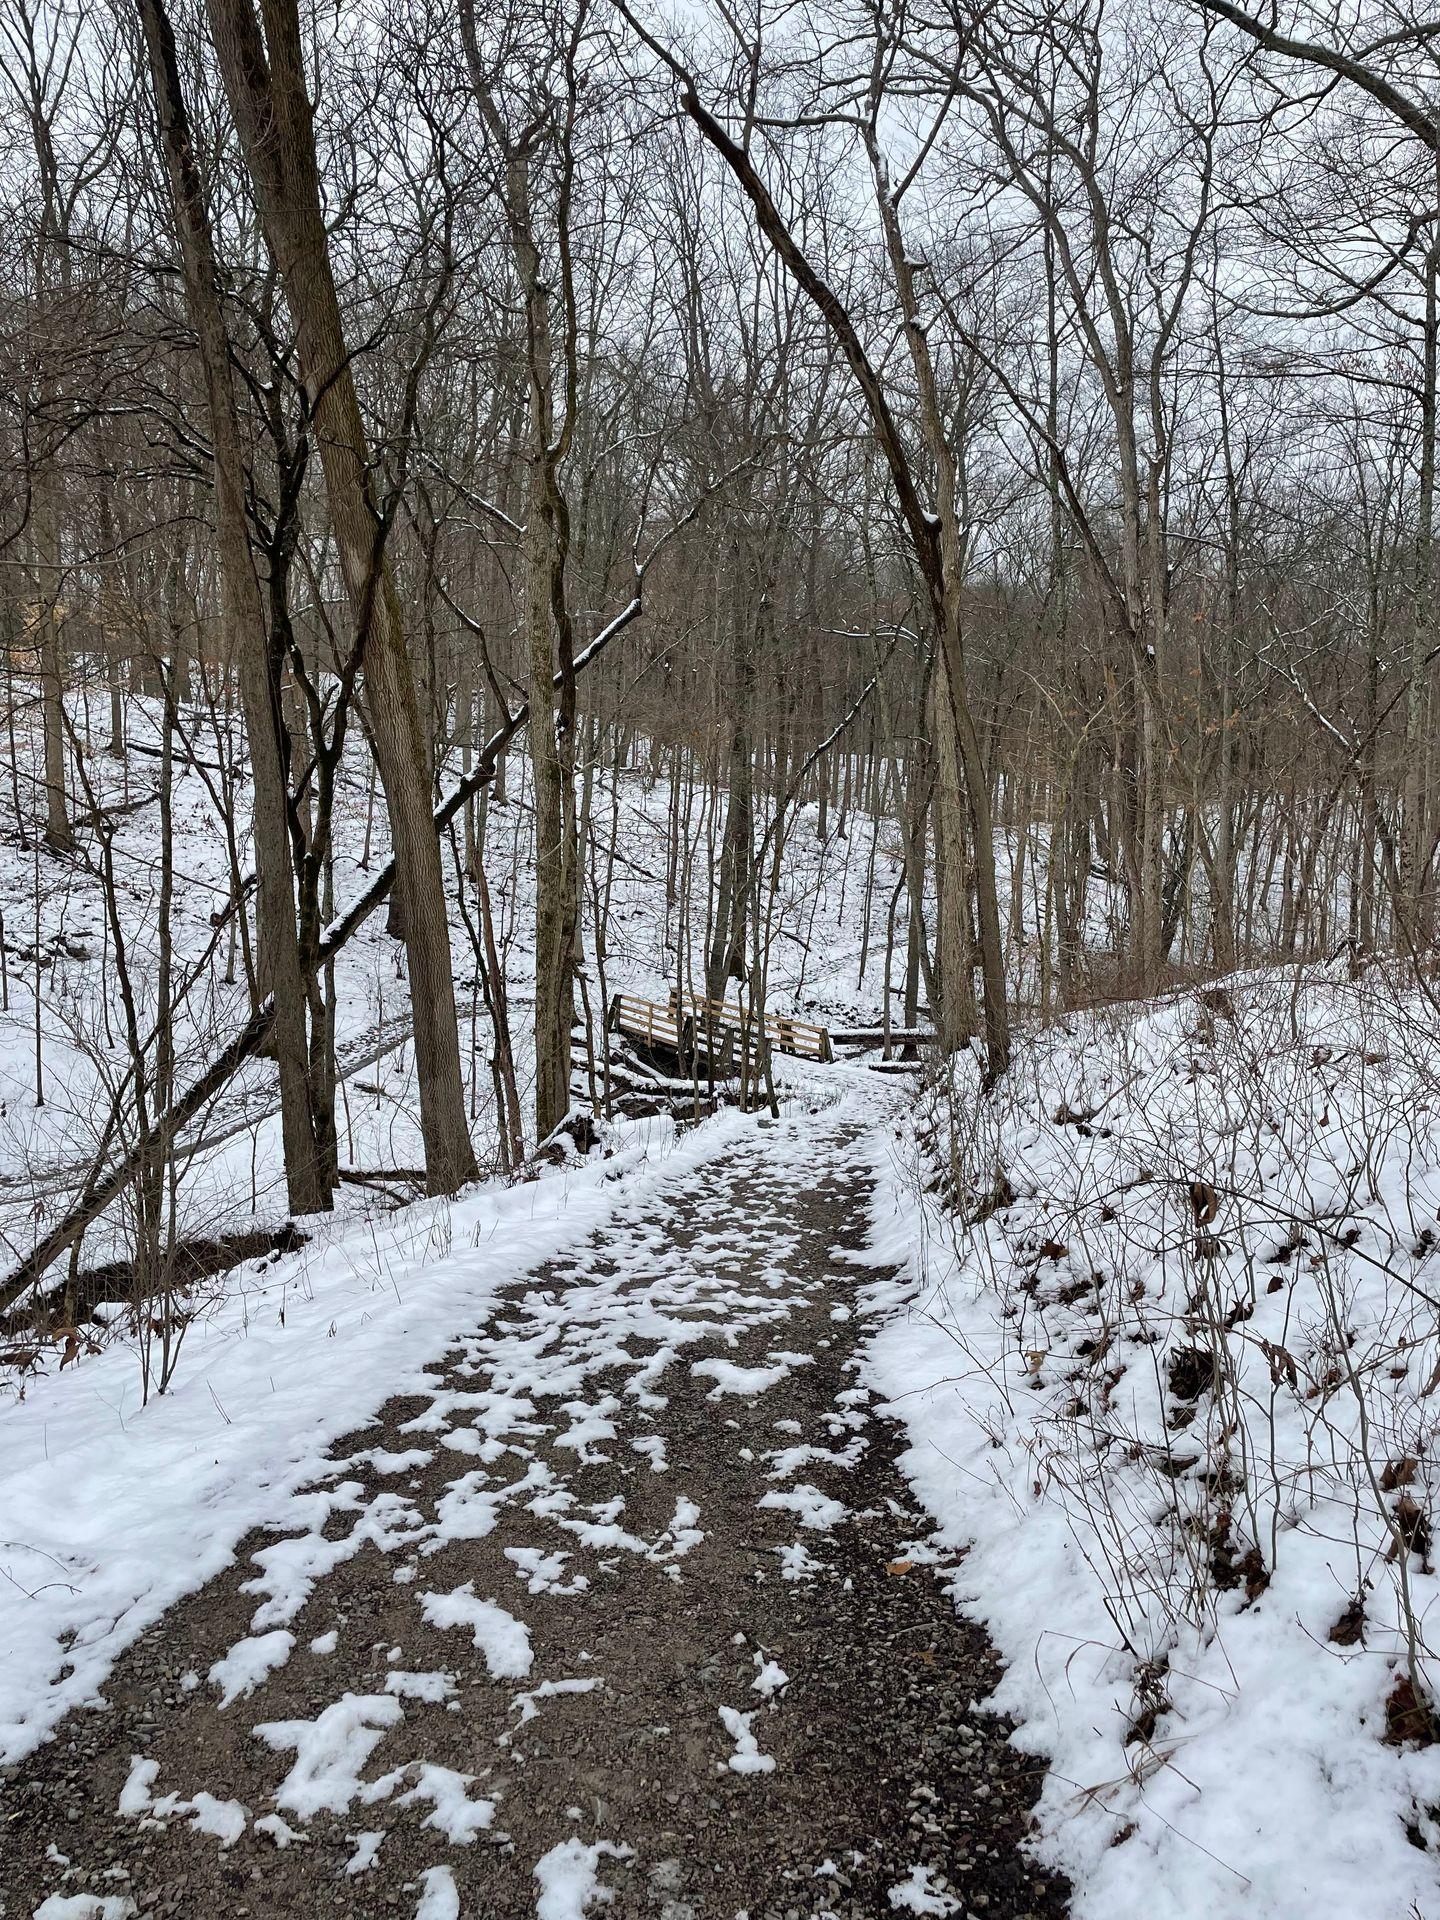 A snow covered trail surrounded by trees at the Cincinnati Nature Center